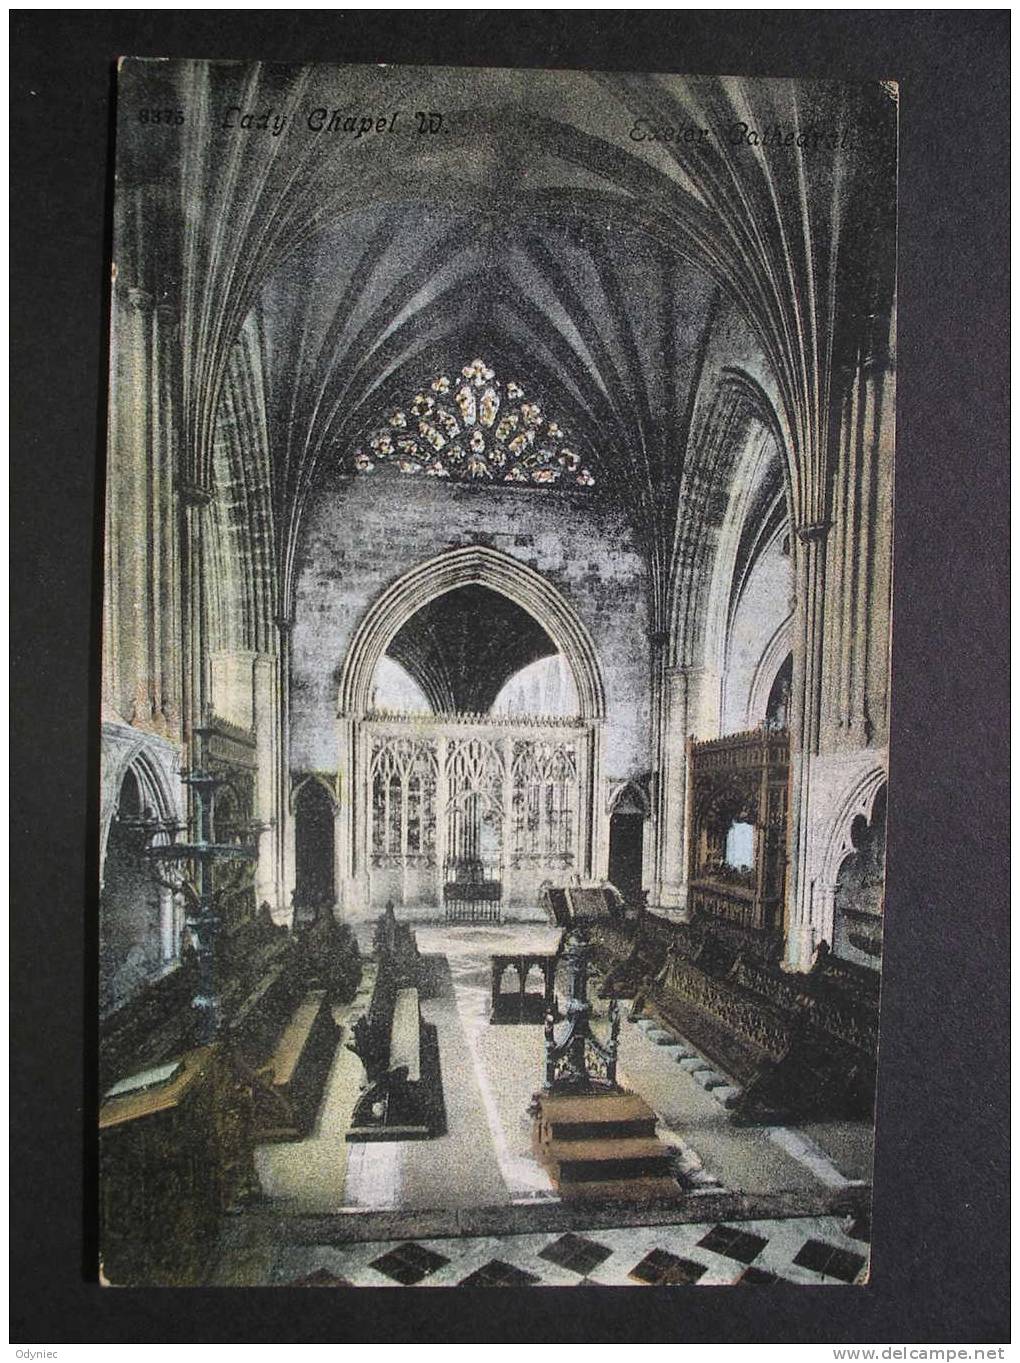 Lady Chapel W.,Exeter Cathedral - Exeter